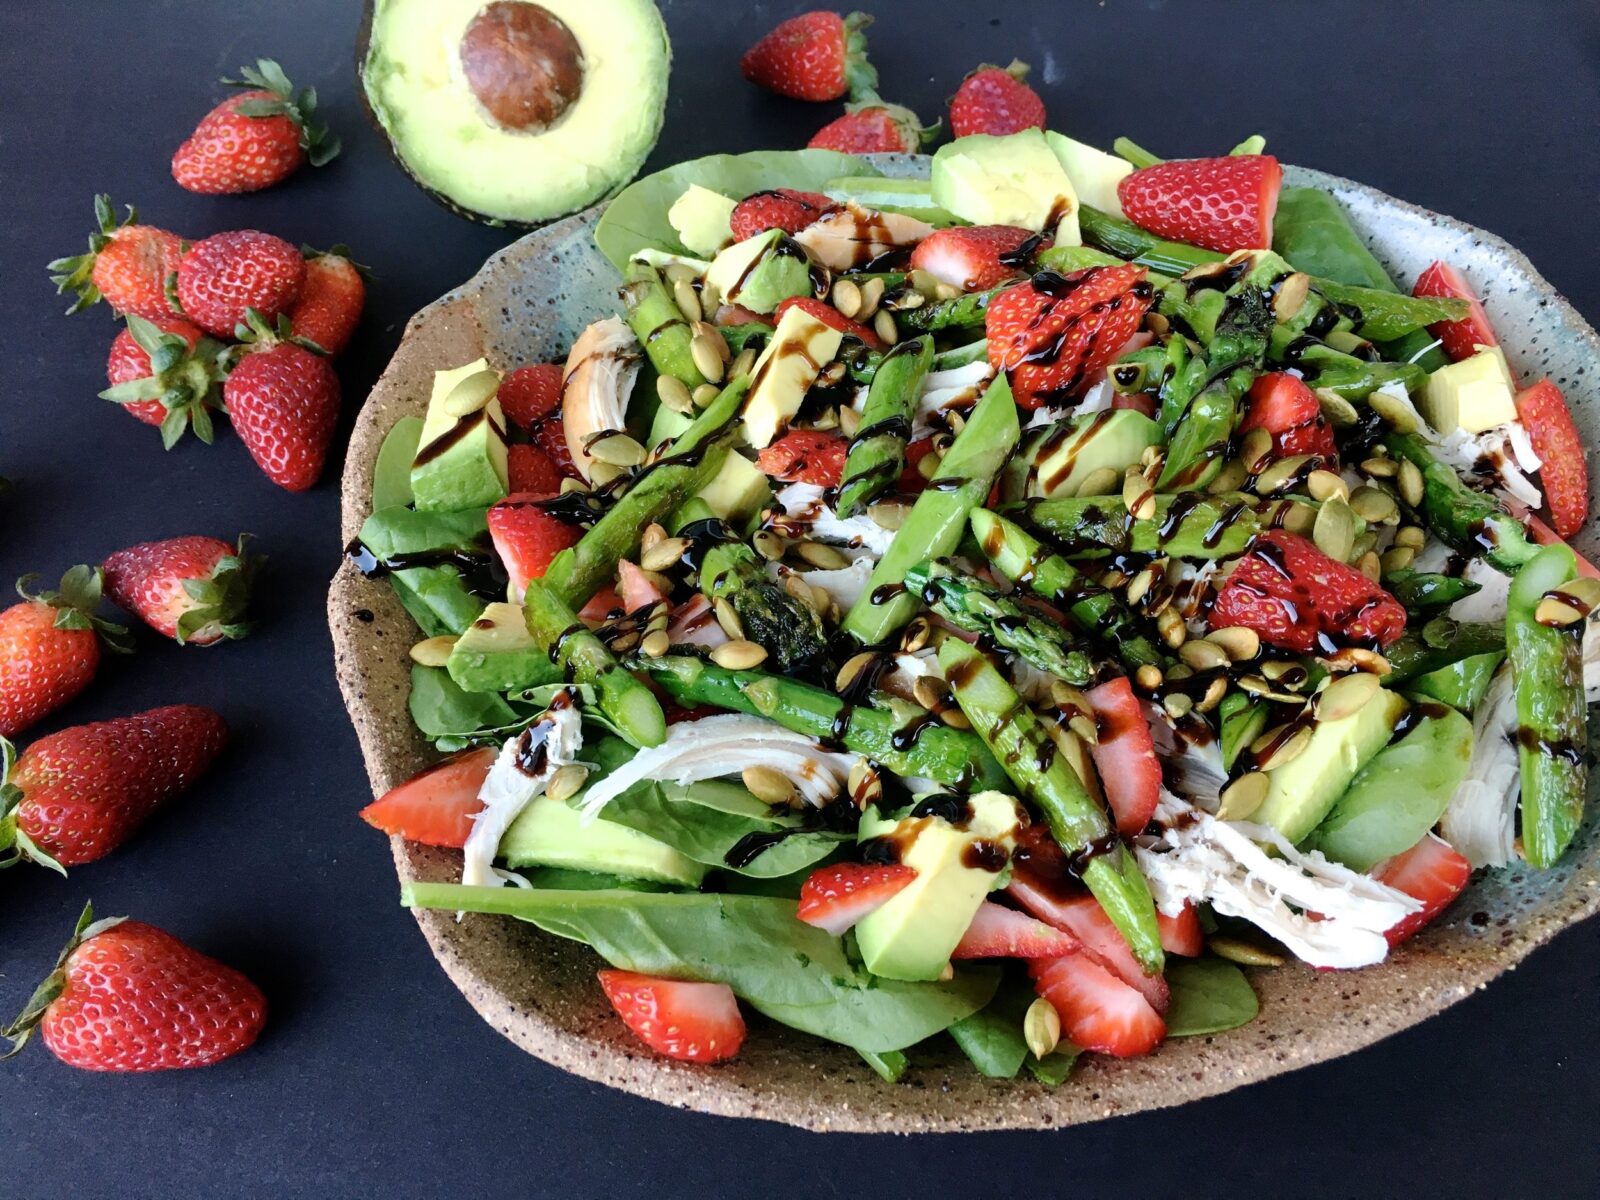 I always add balsamic glaze to my salads. A bit a sugar? Who cares. I save my willpower for the stuff that matters. Image: Lyndi Cohen